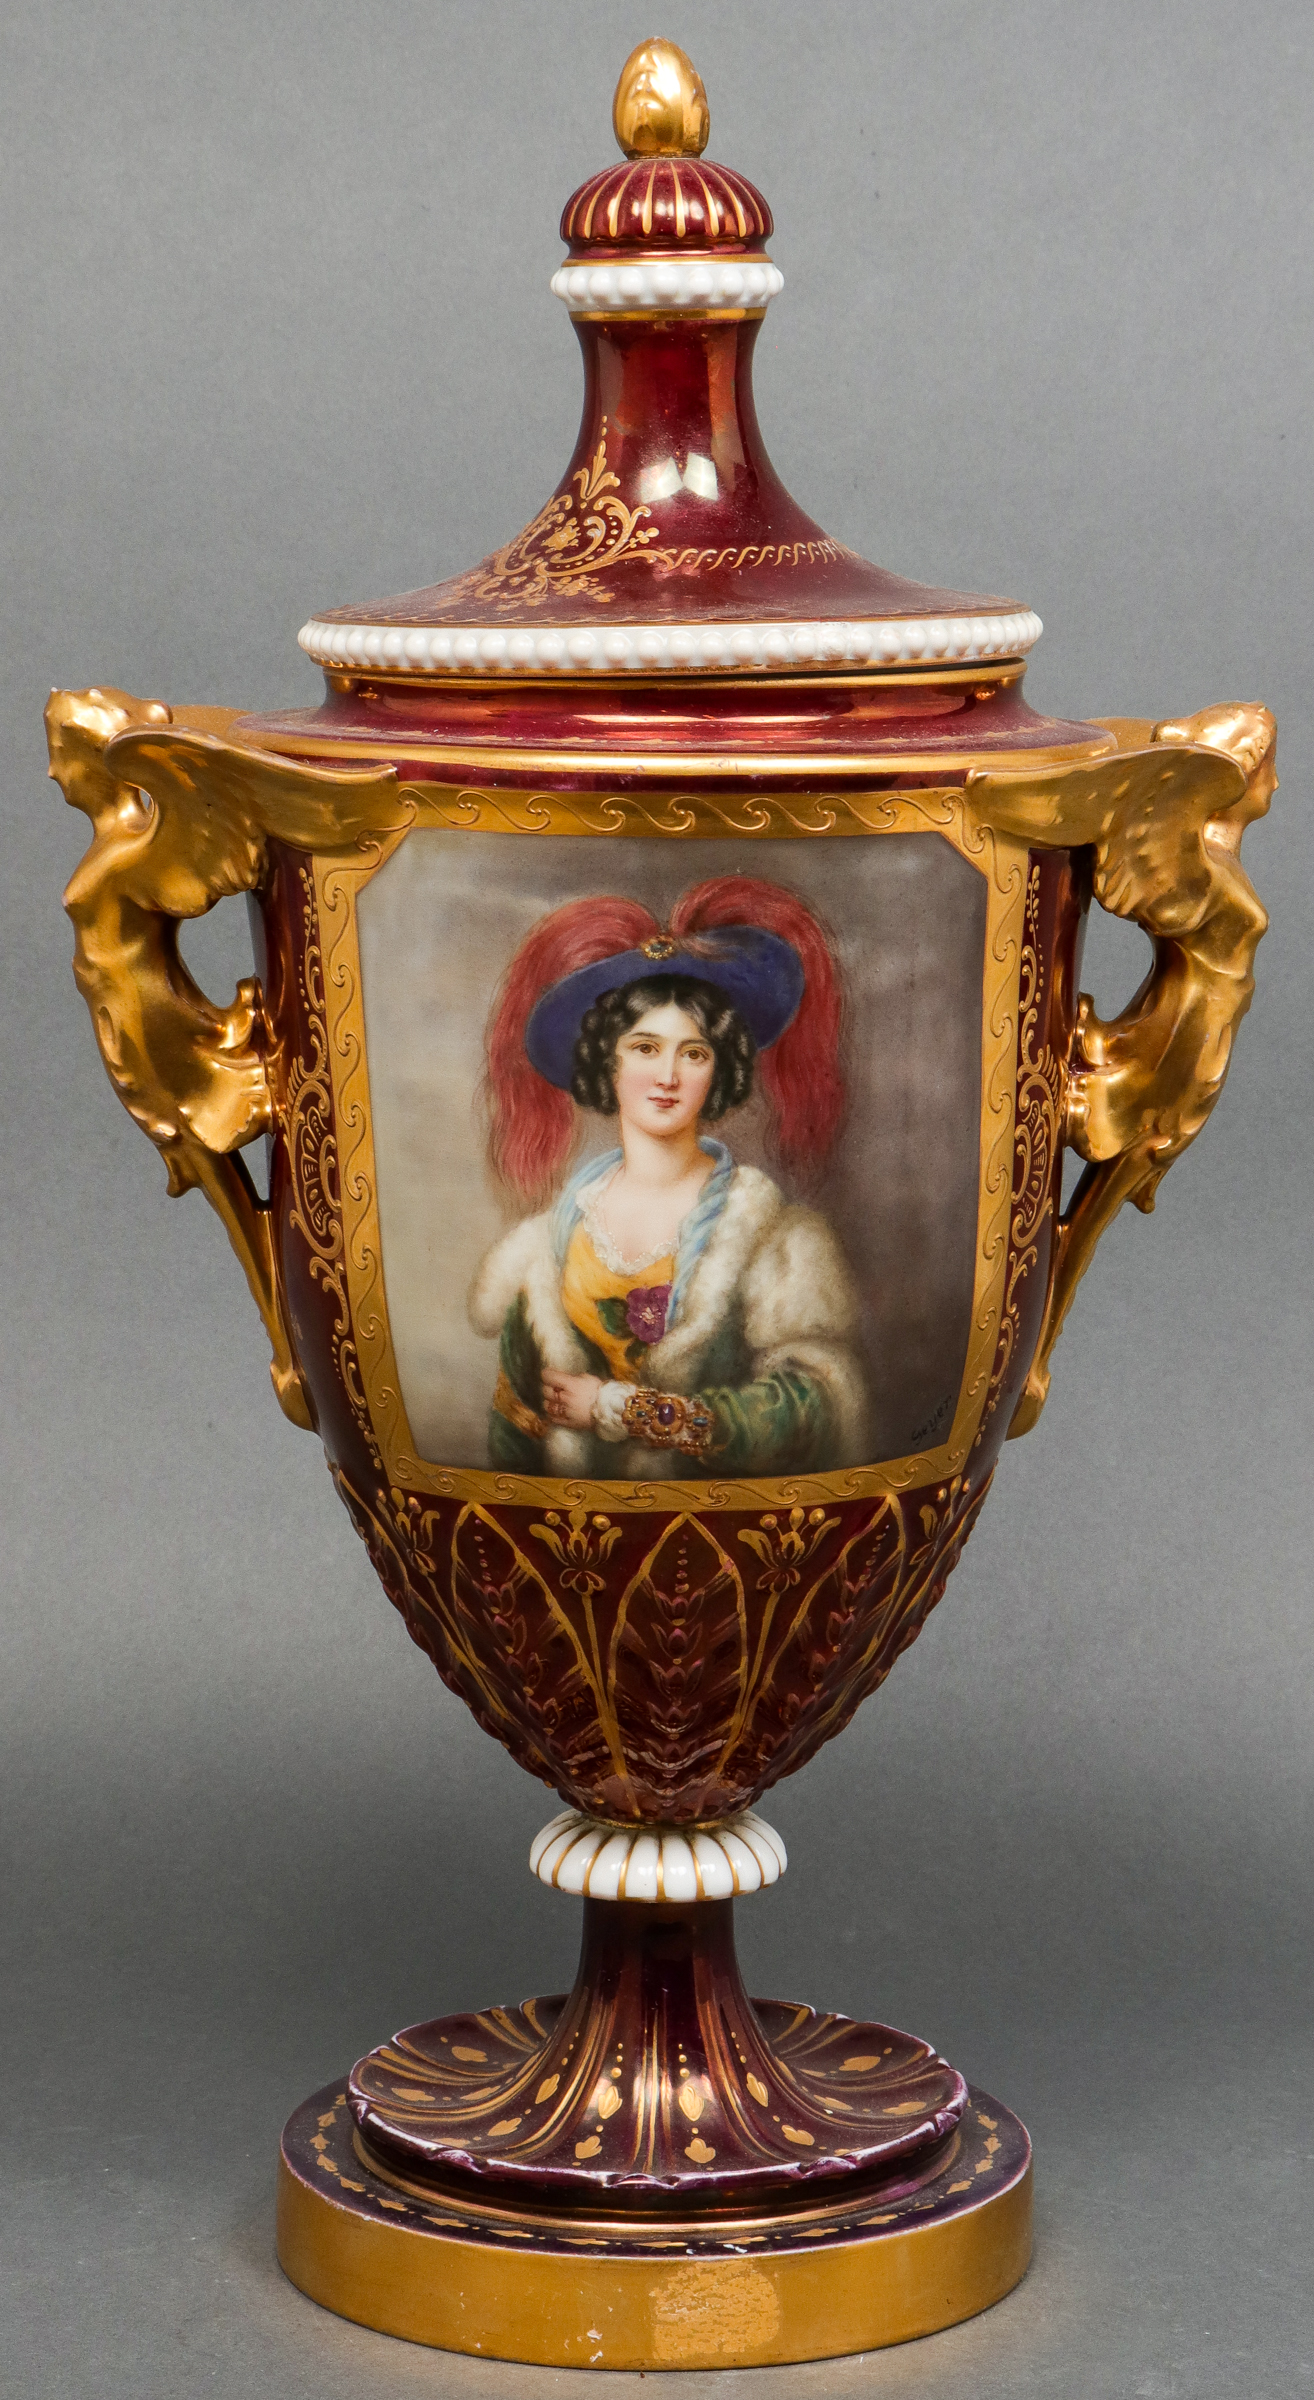 ROYAL VIENNA TYPE PORCELAIN COVERED 3c28f5